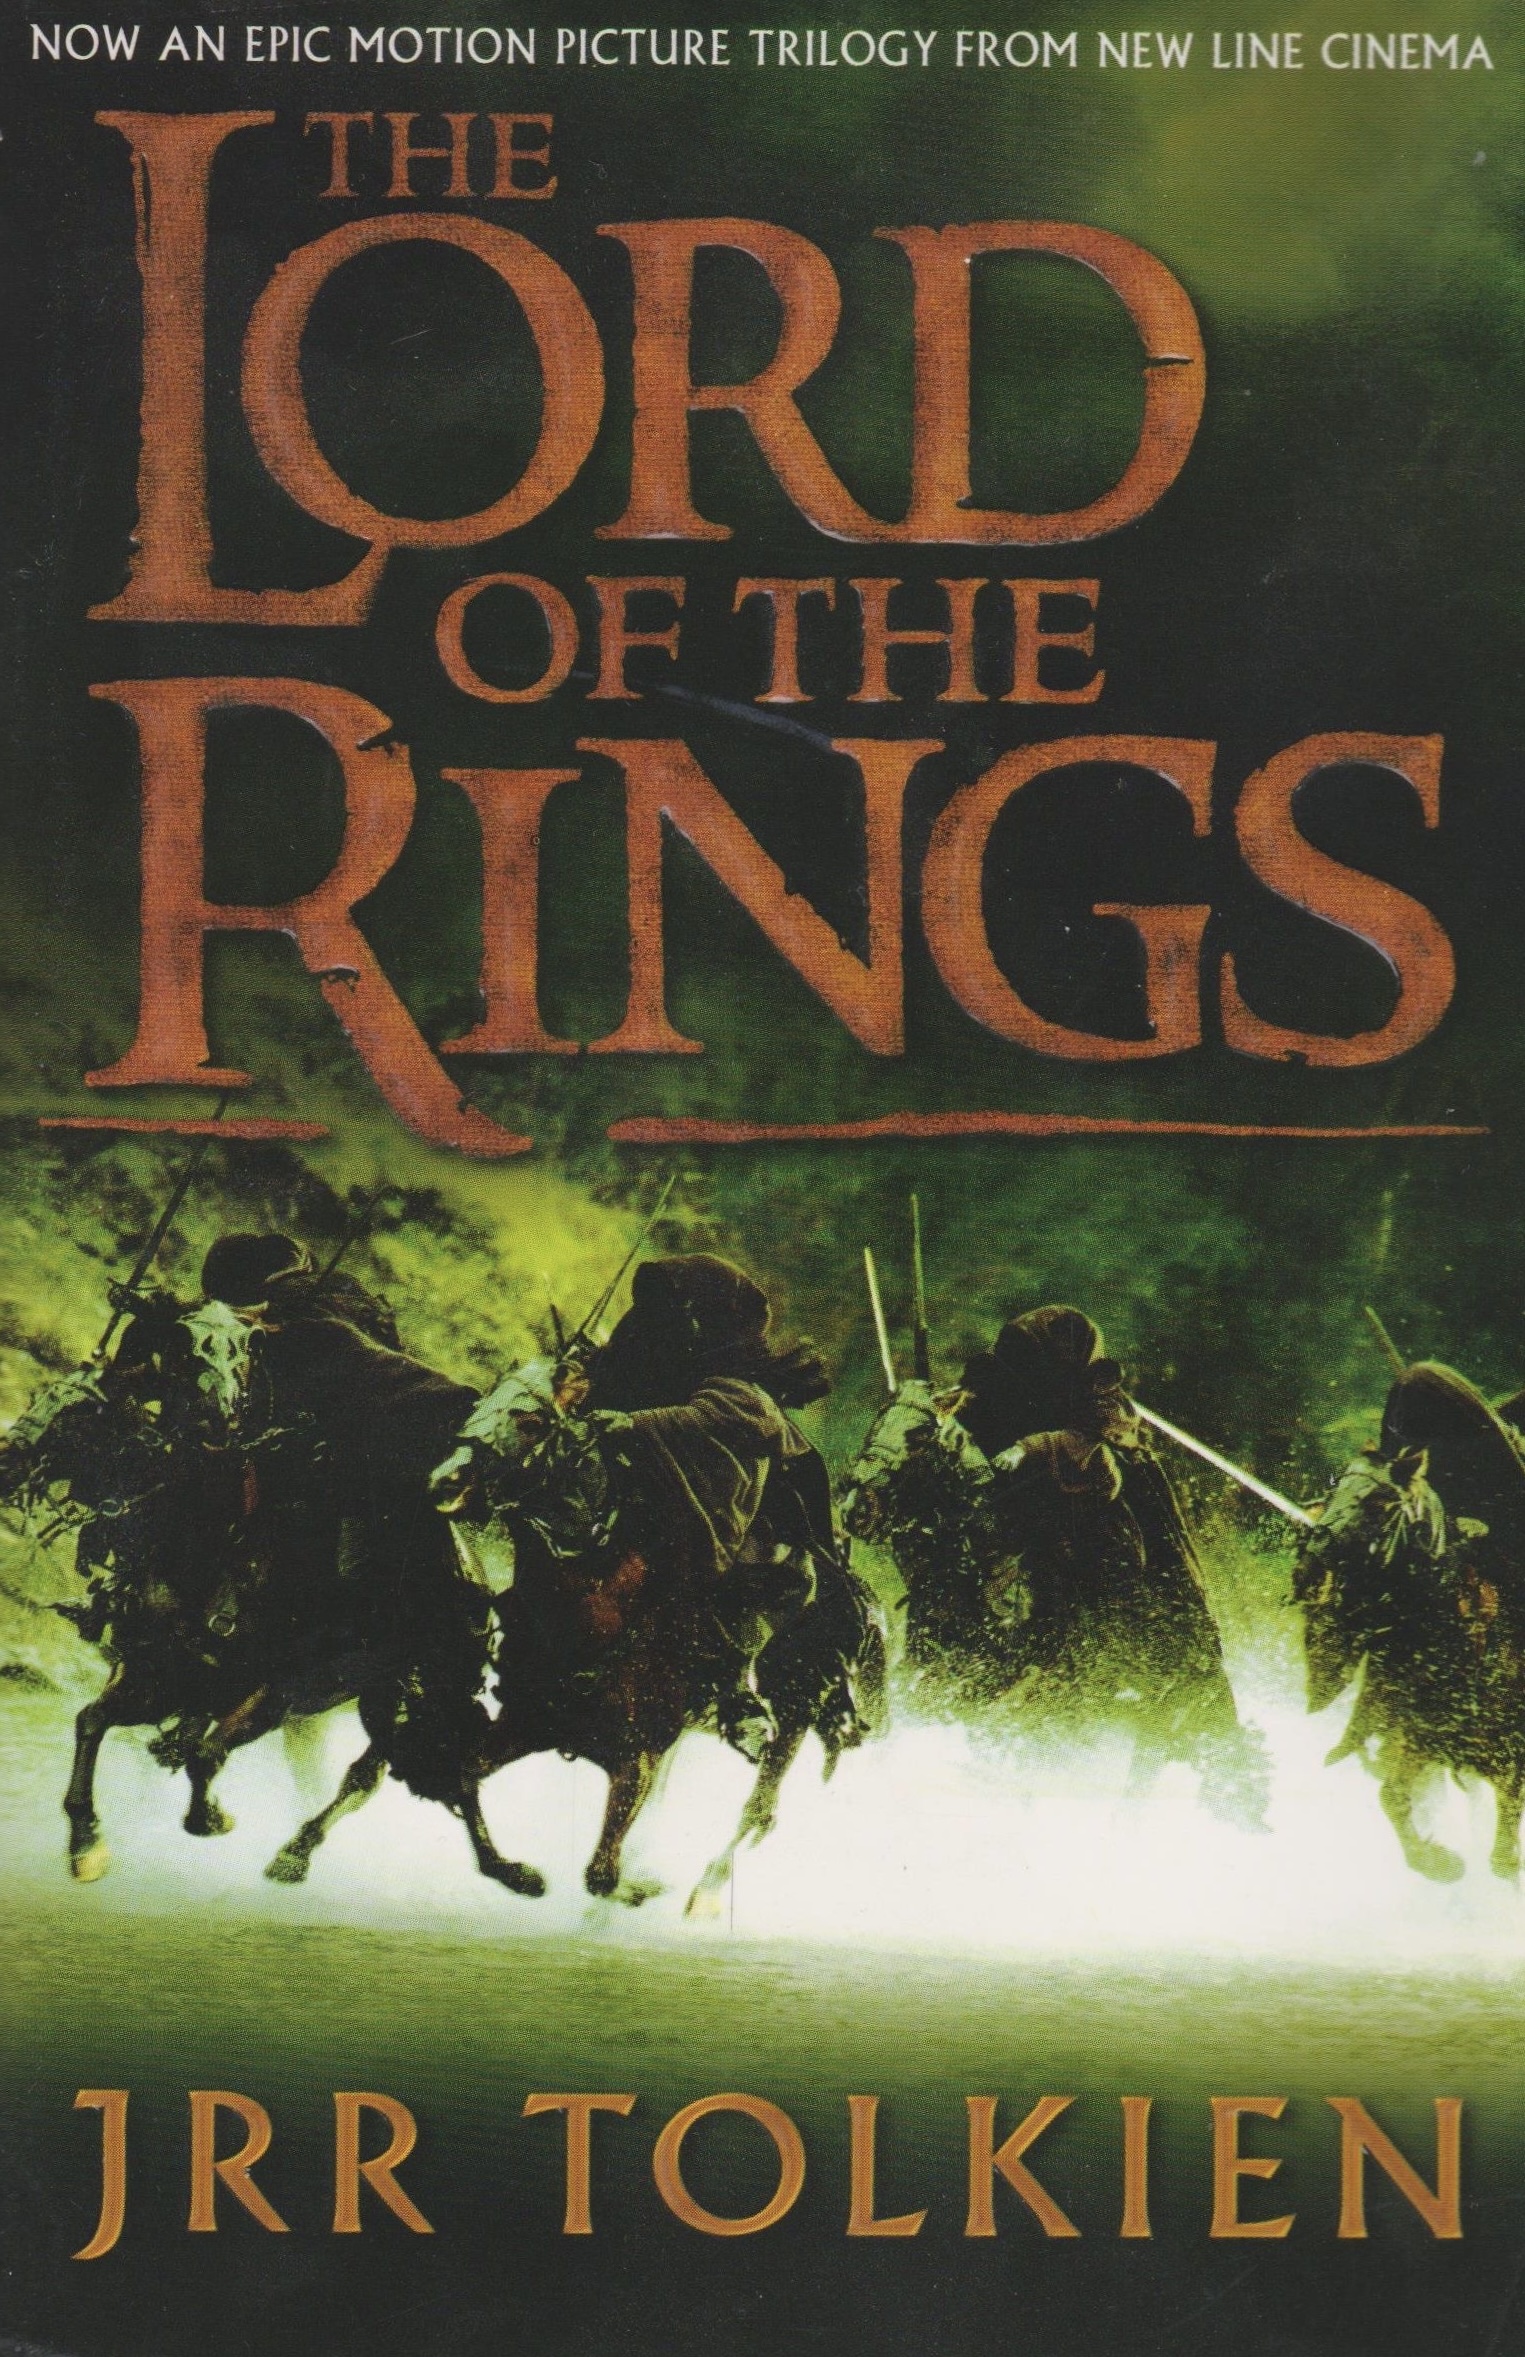 J.R.R. Tolkien: THE LORD OF THE RINGS (2001, Collins)